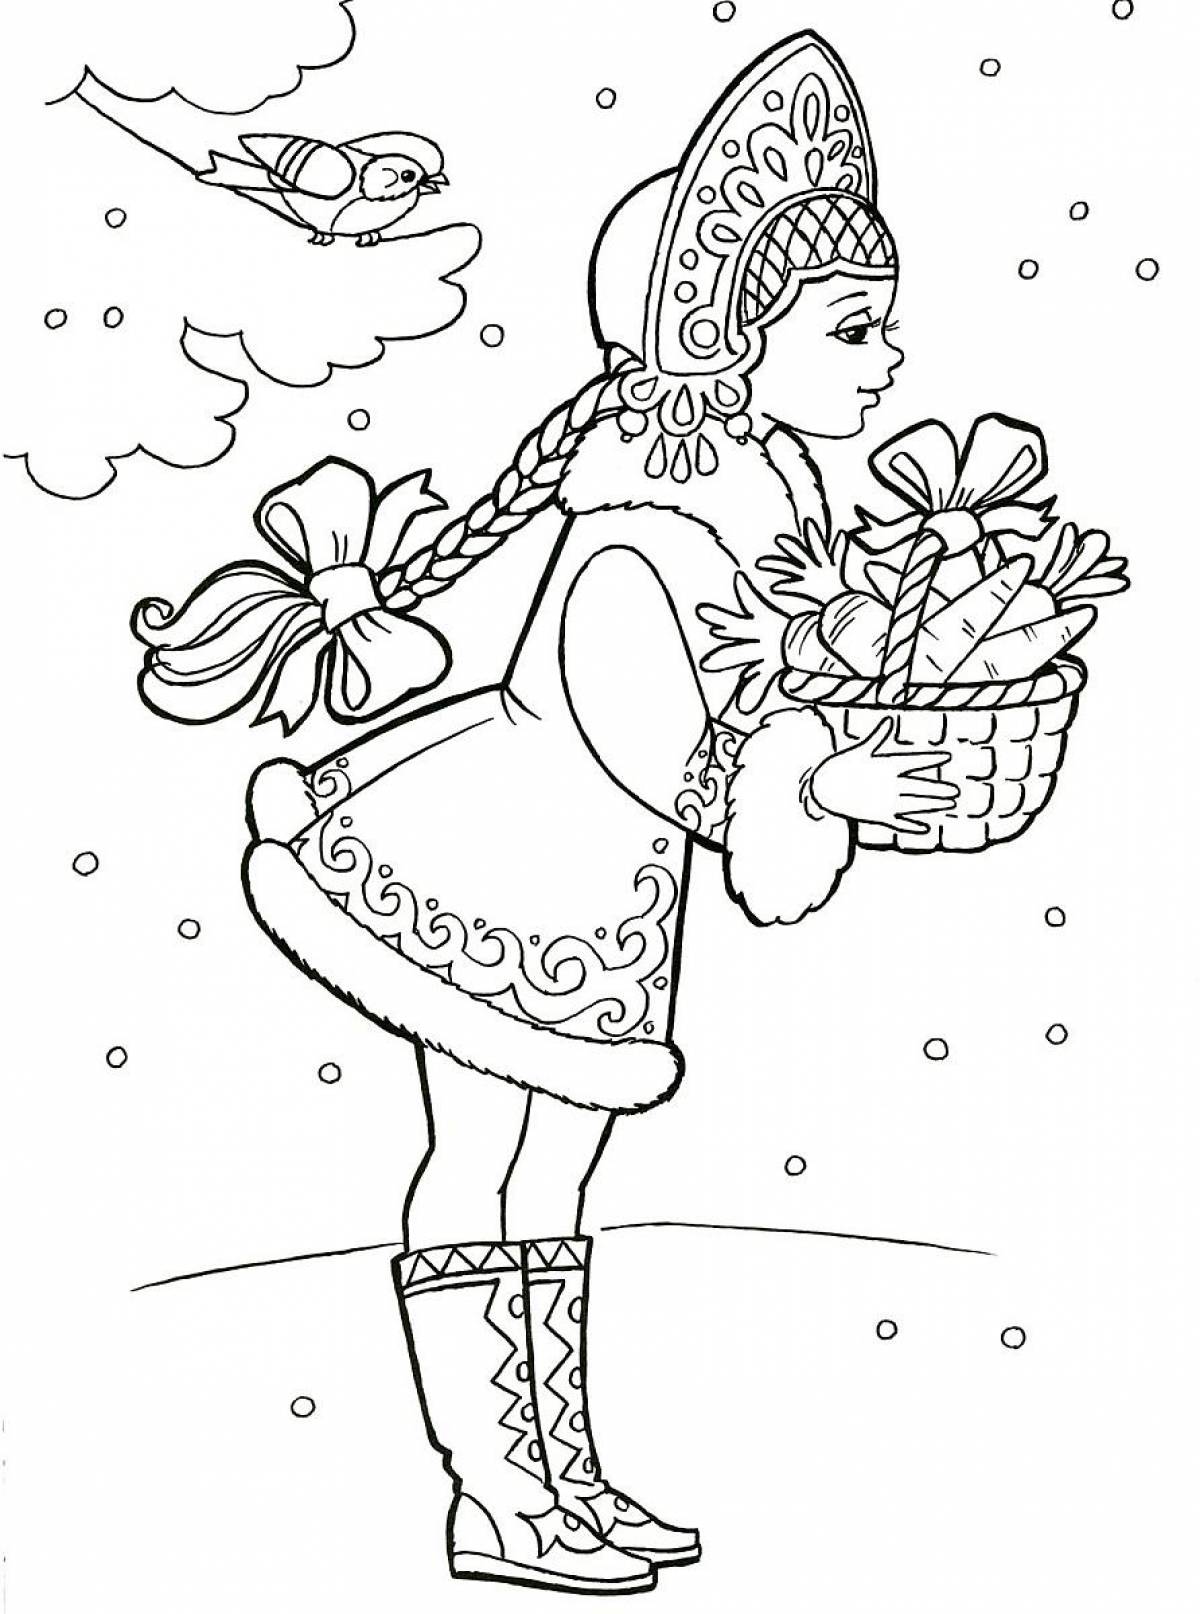 Snow Maiden with a basket